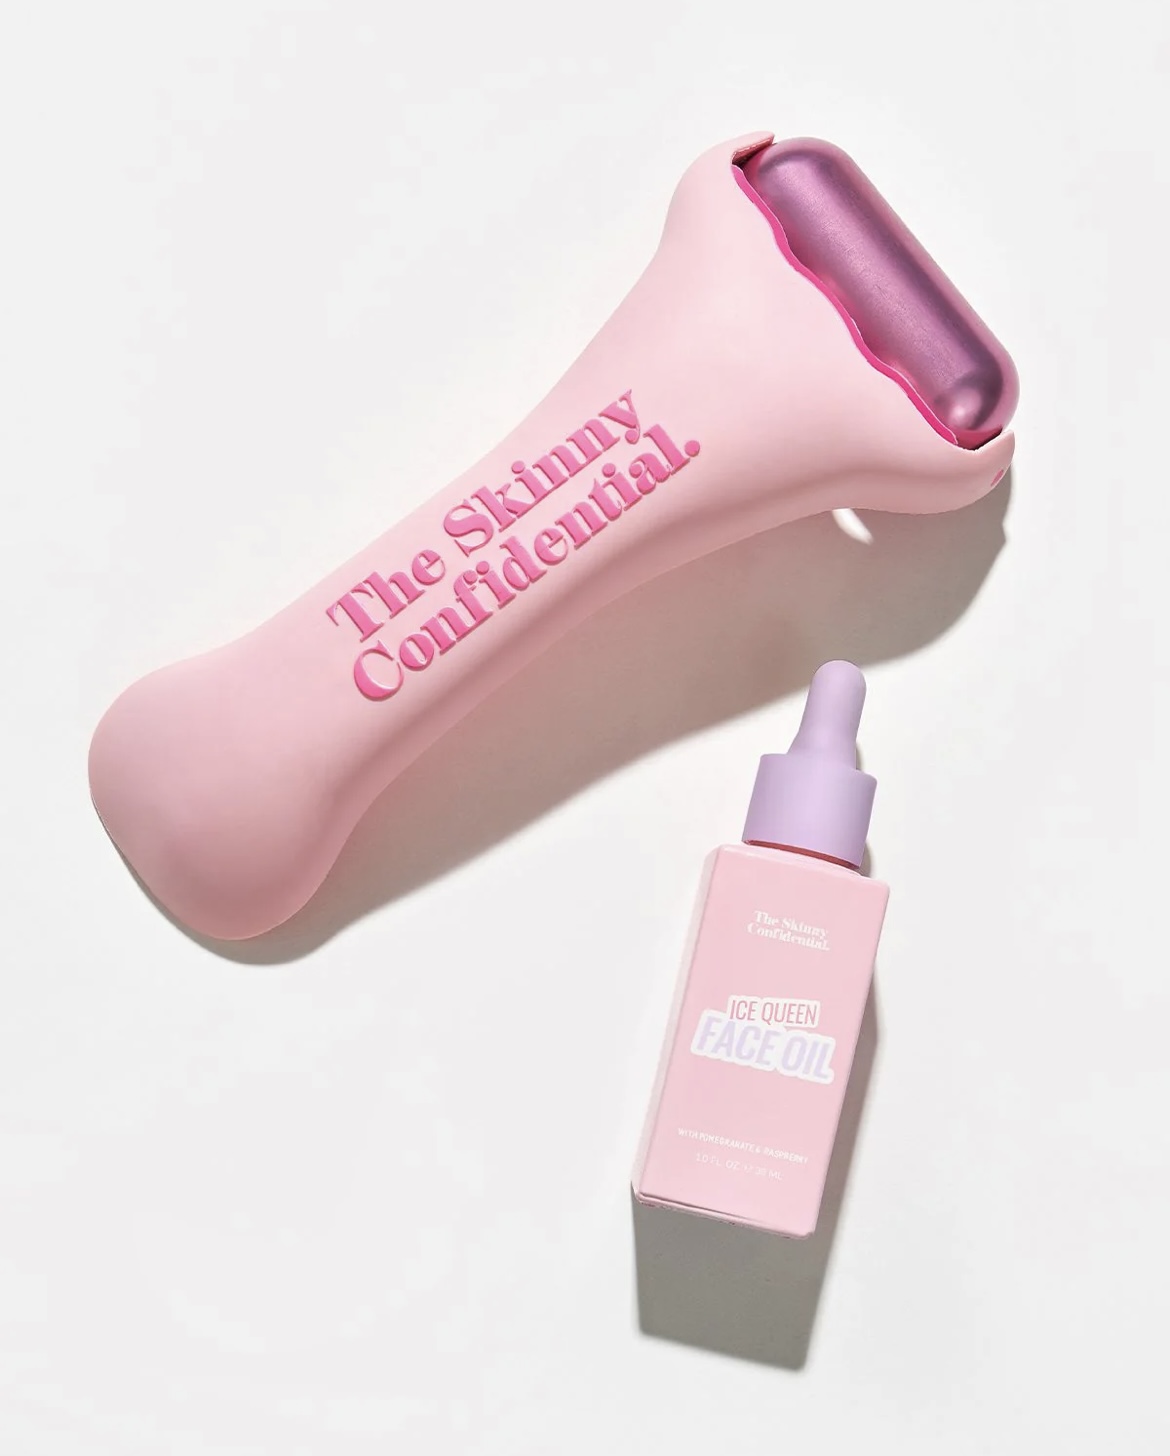 Skinny Confidential Facial Ice Roller: My Secret to Refreshed and Glowing Skin